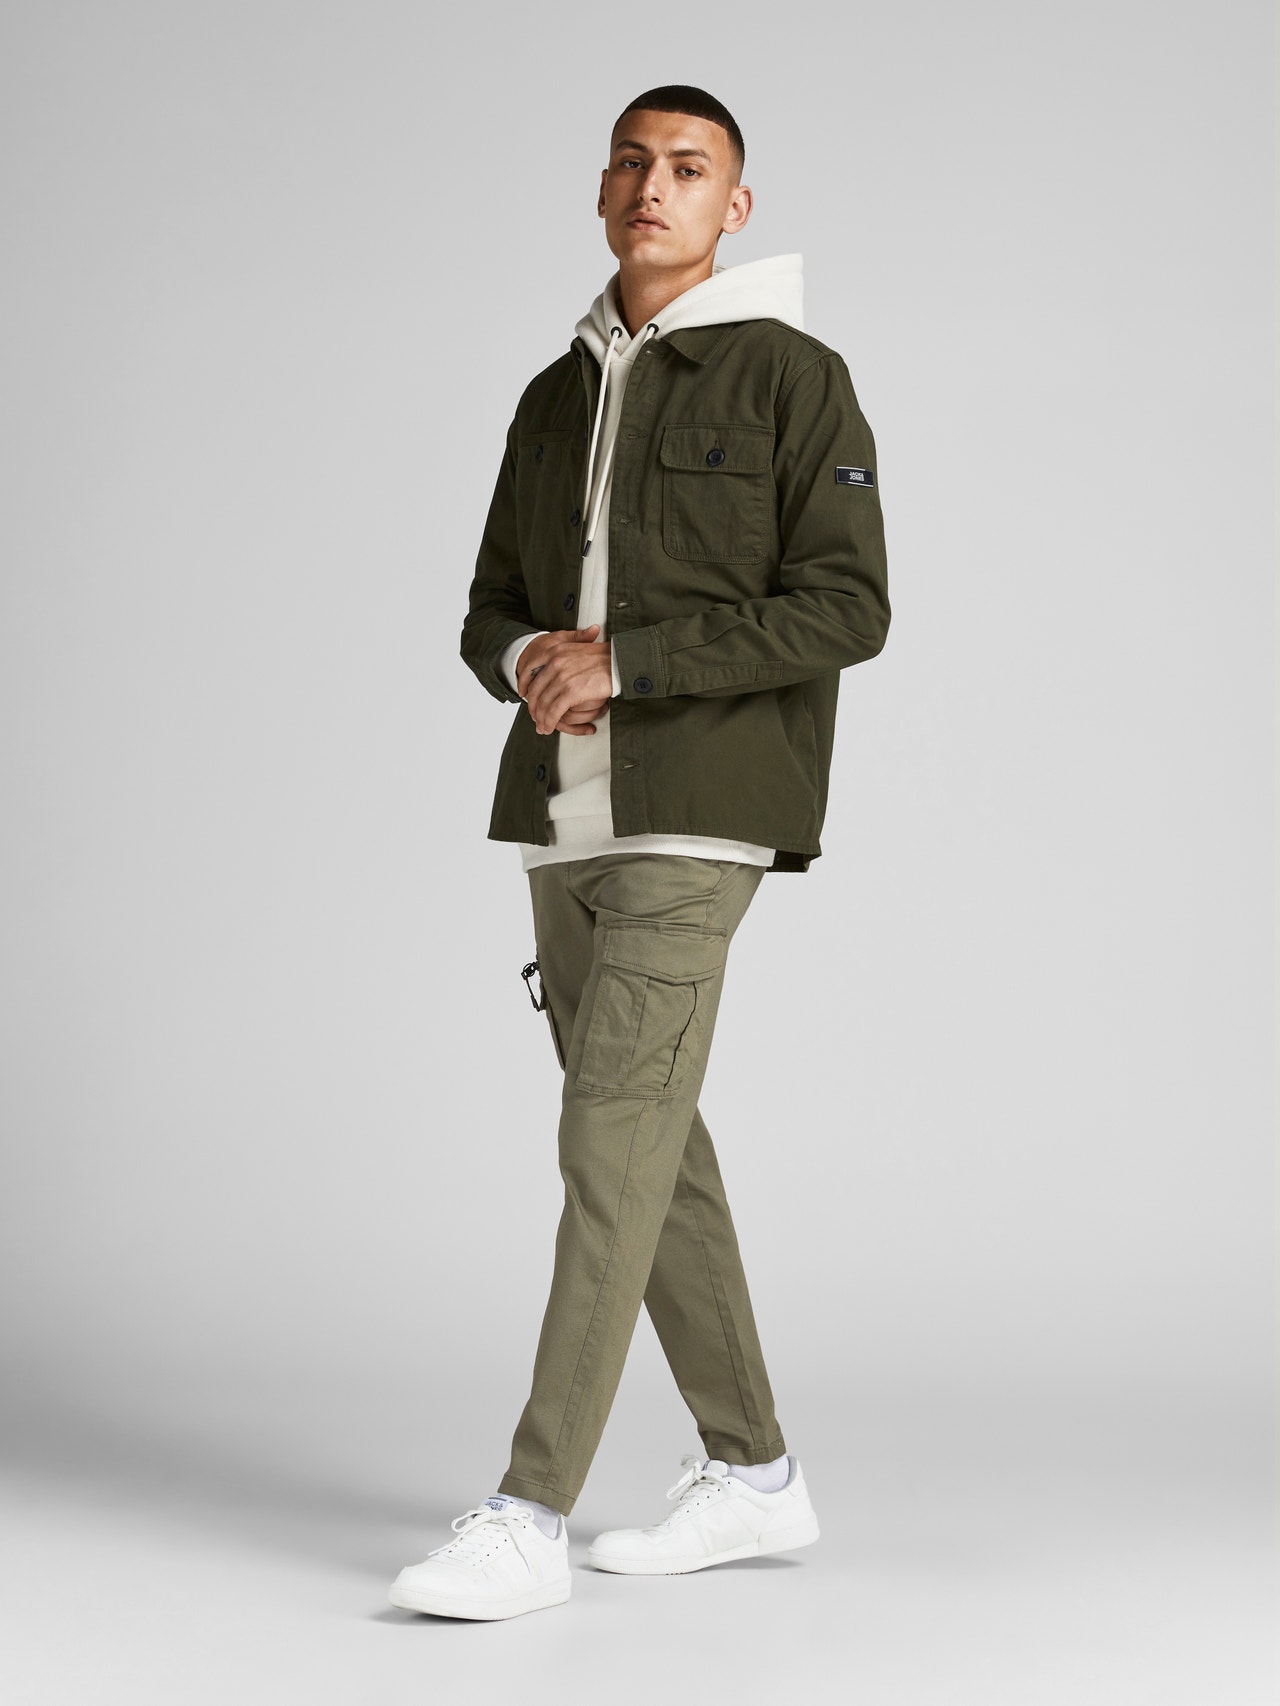 Jack & Jones Tapered Fit Cargo Pants -Dusty Olive - 12194240